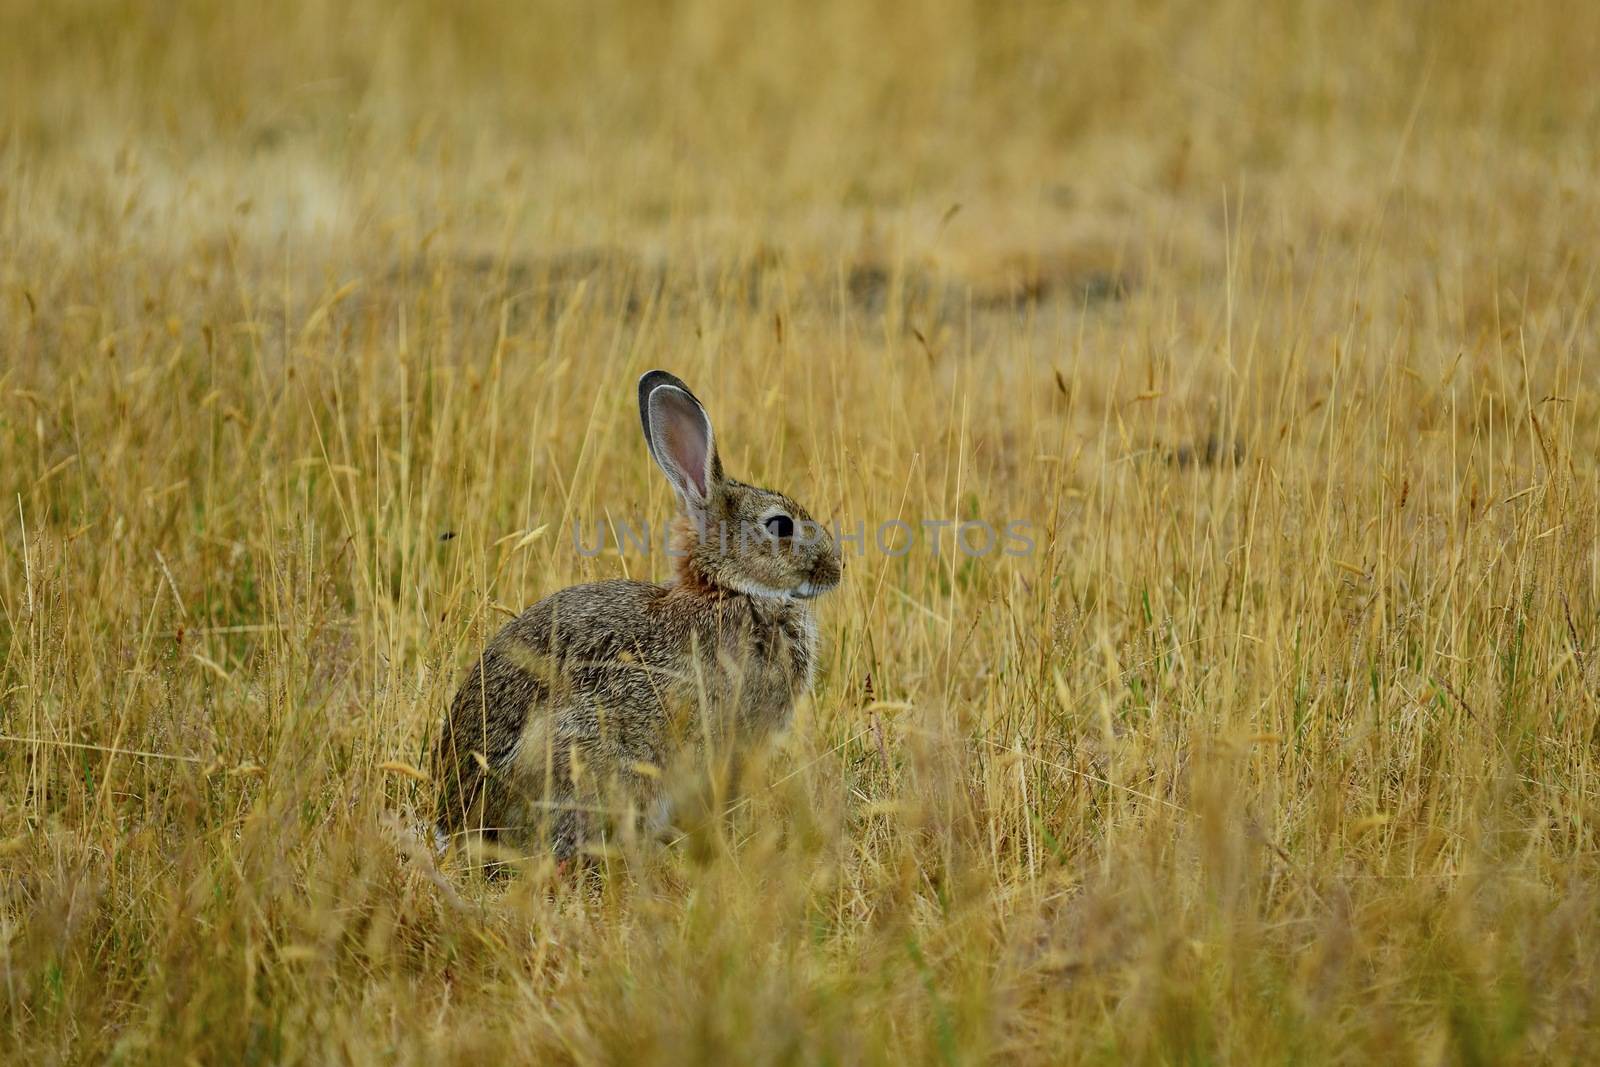 Hare  (Leporidae family) in natural environment. They are similar in size and form to rabbits and have similar herbivorous diets, but generally have longer ears and live solitarily or in pairs. by Marshalkina